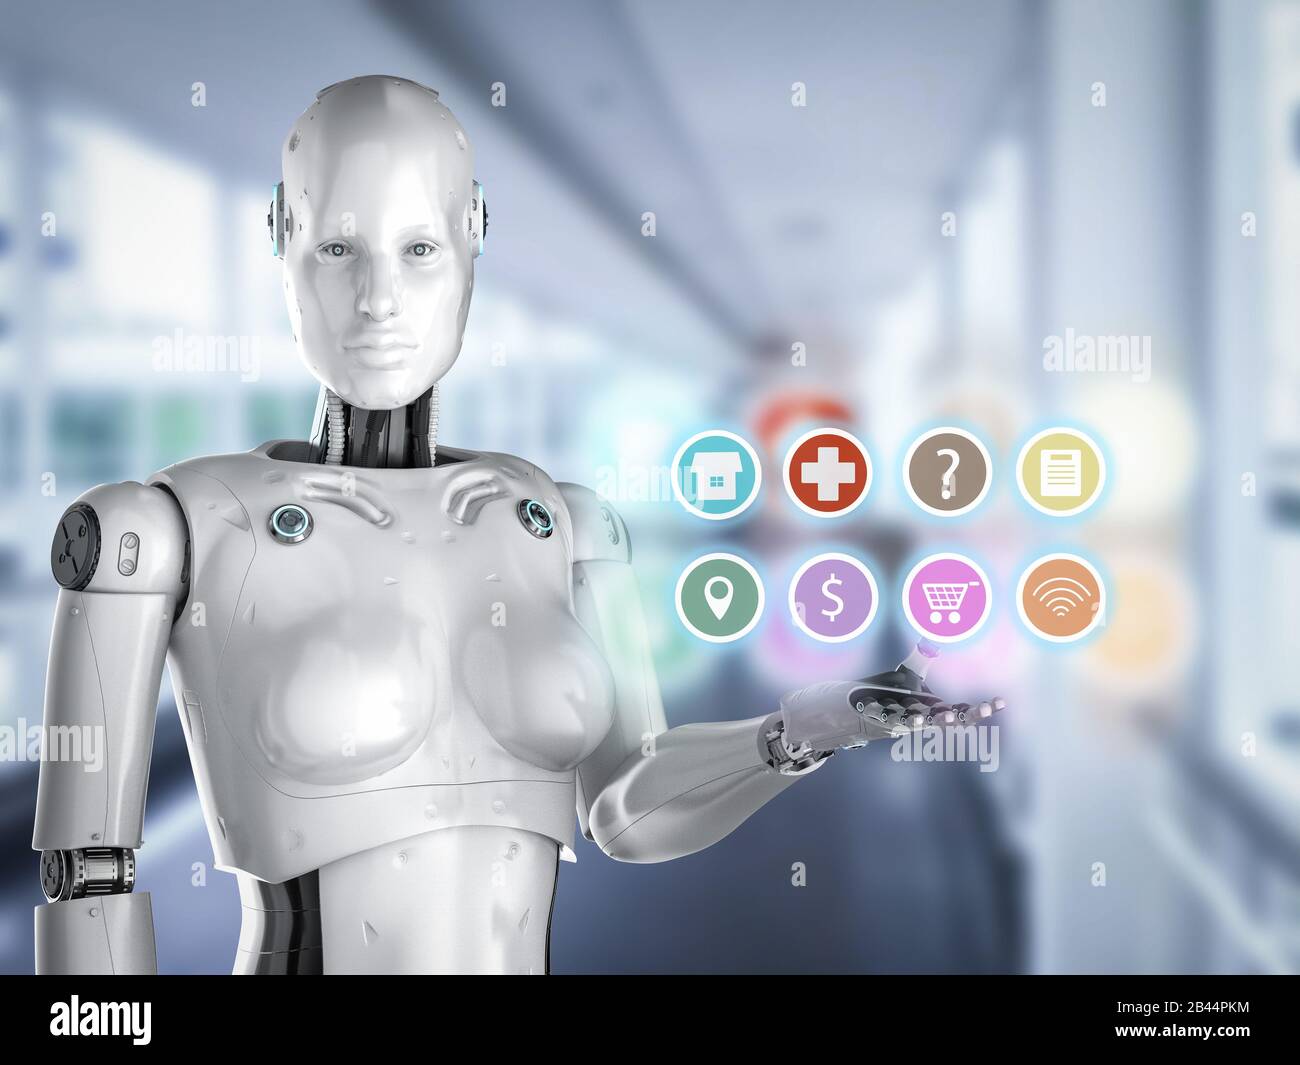 Robot assistant concept with 3d rendering female cyborg with icon display Stock Photo